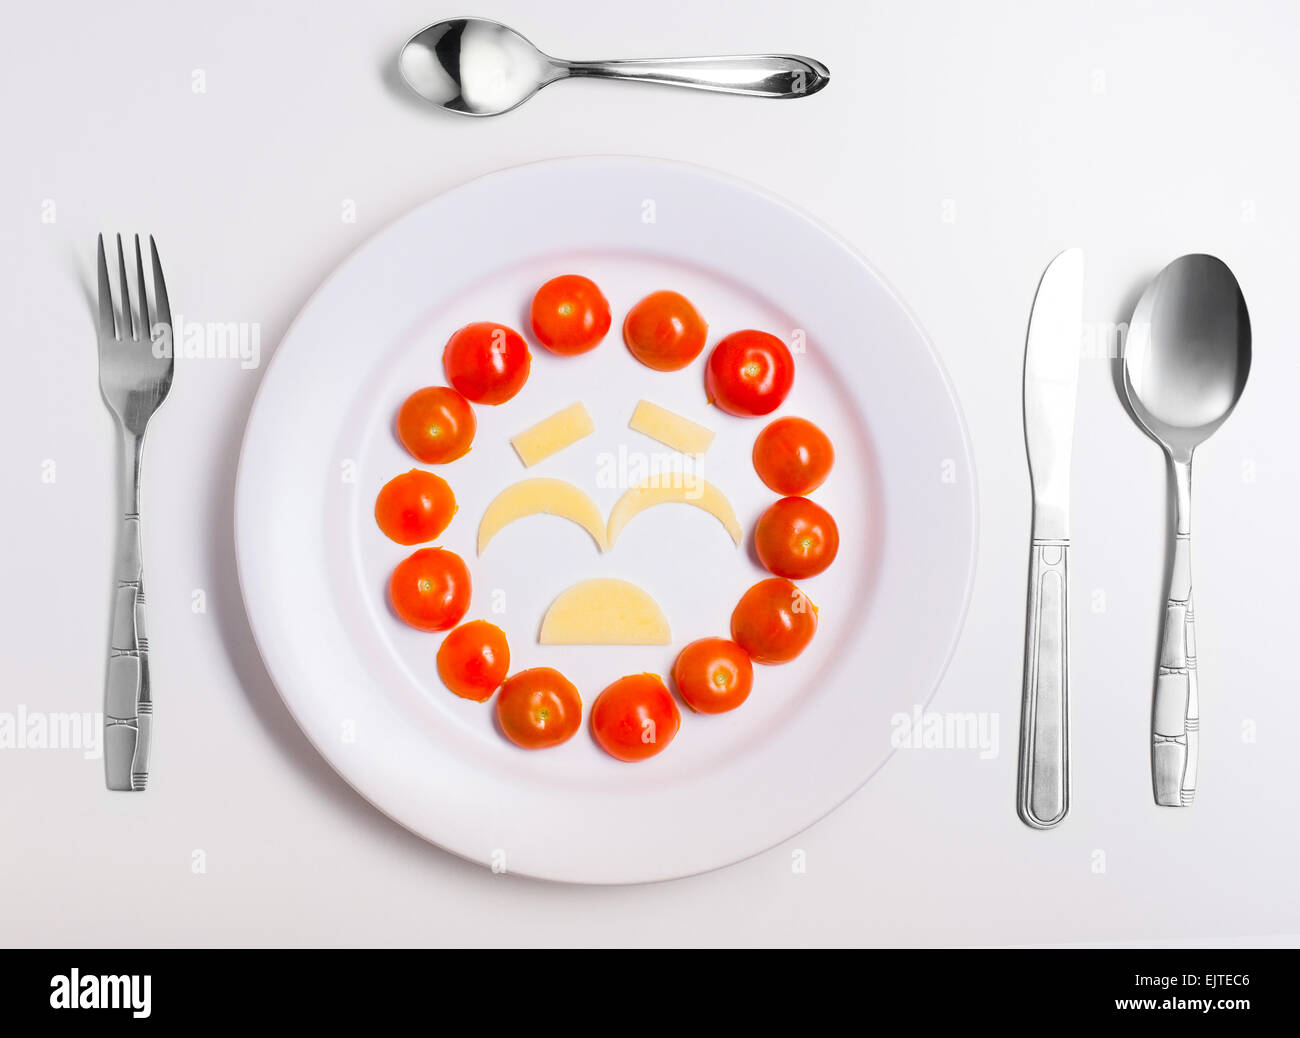 crying emoticon food, made from cheese and tomatoes, on a plate with cutlery, isolated Stock Photo